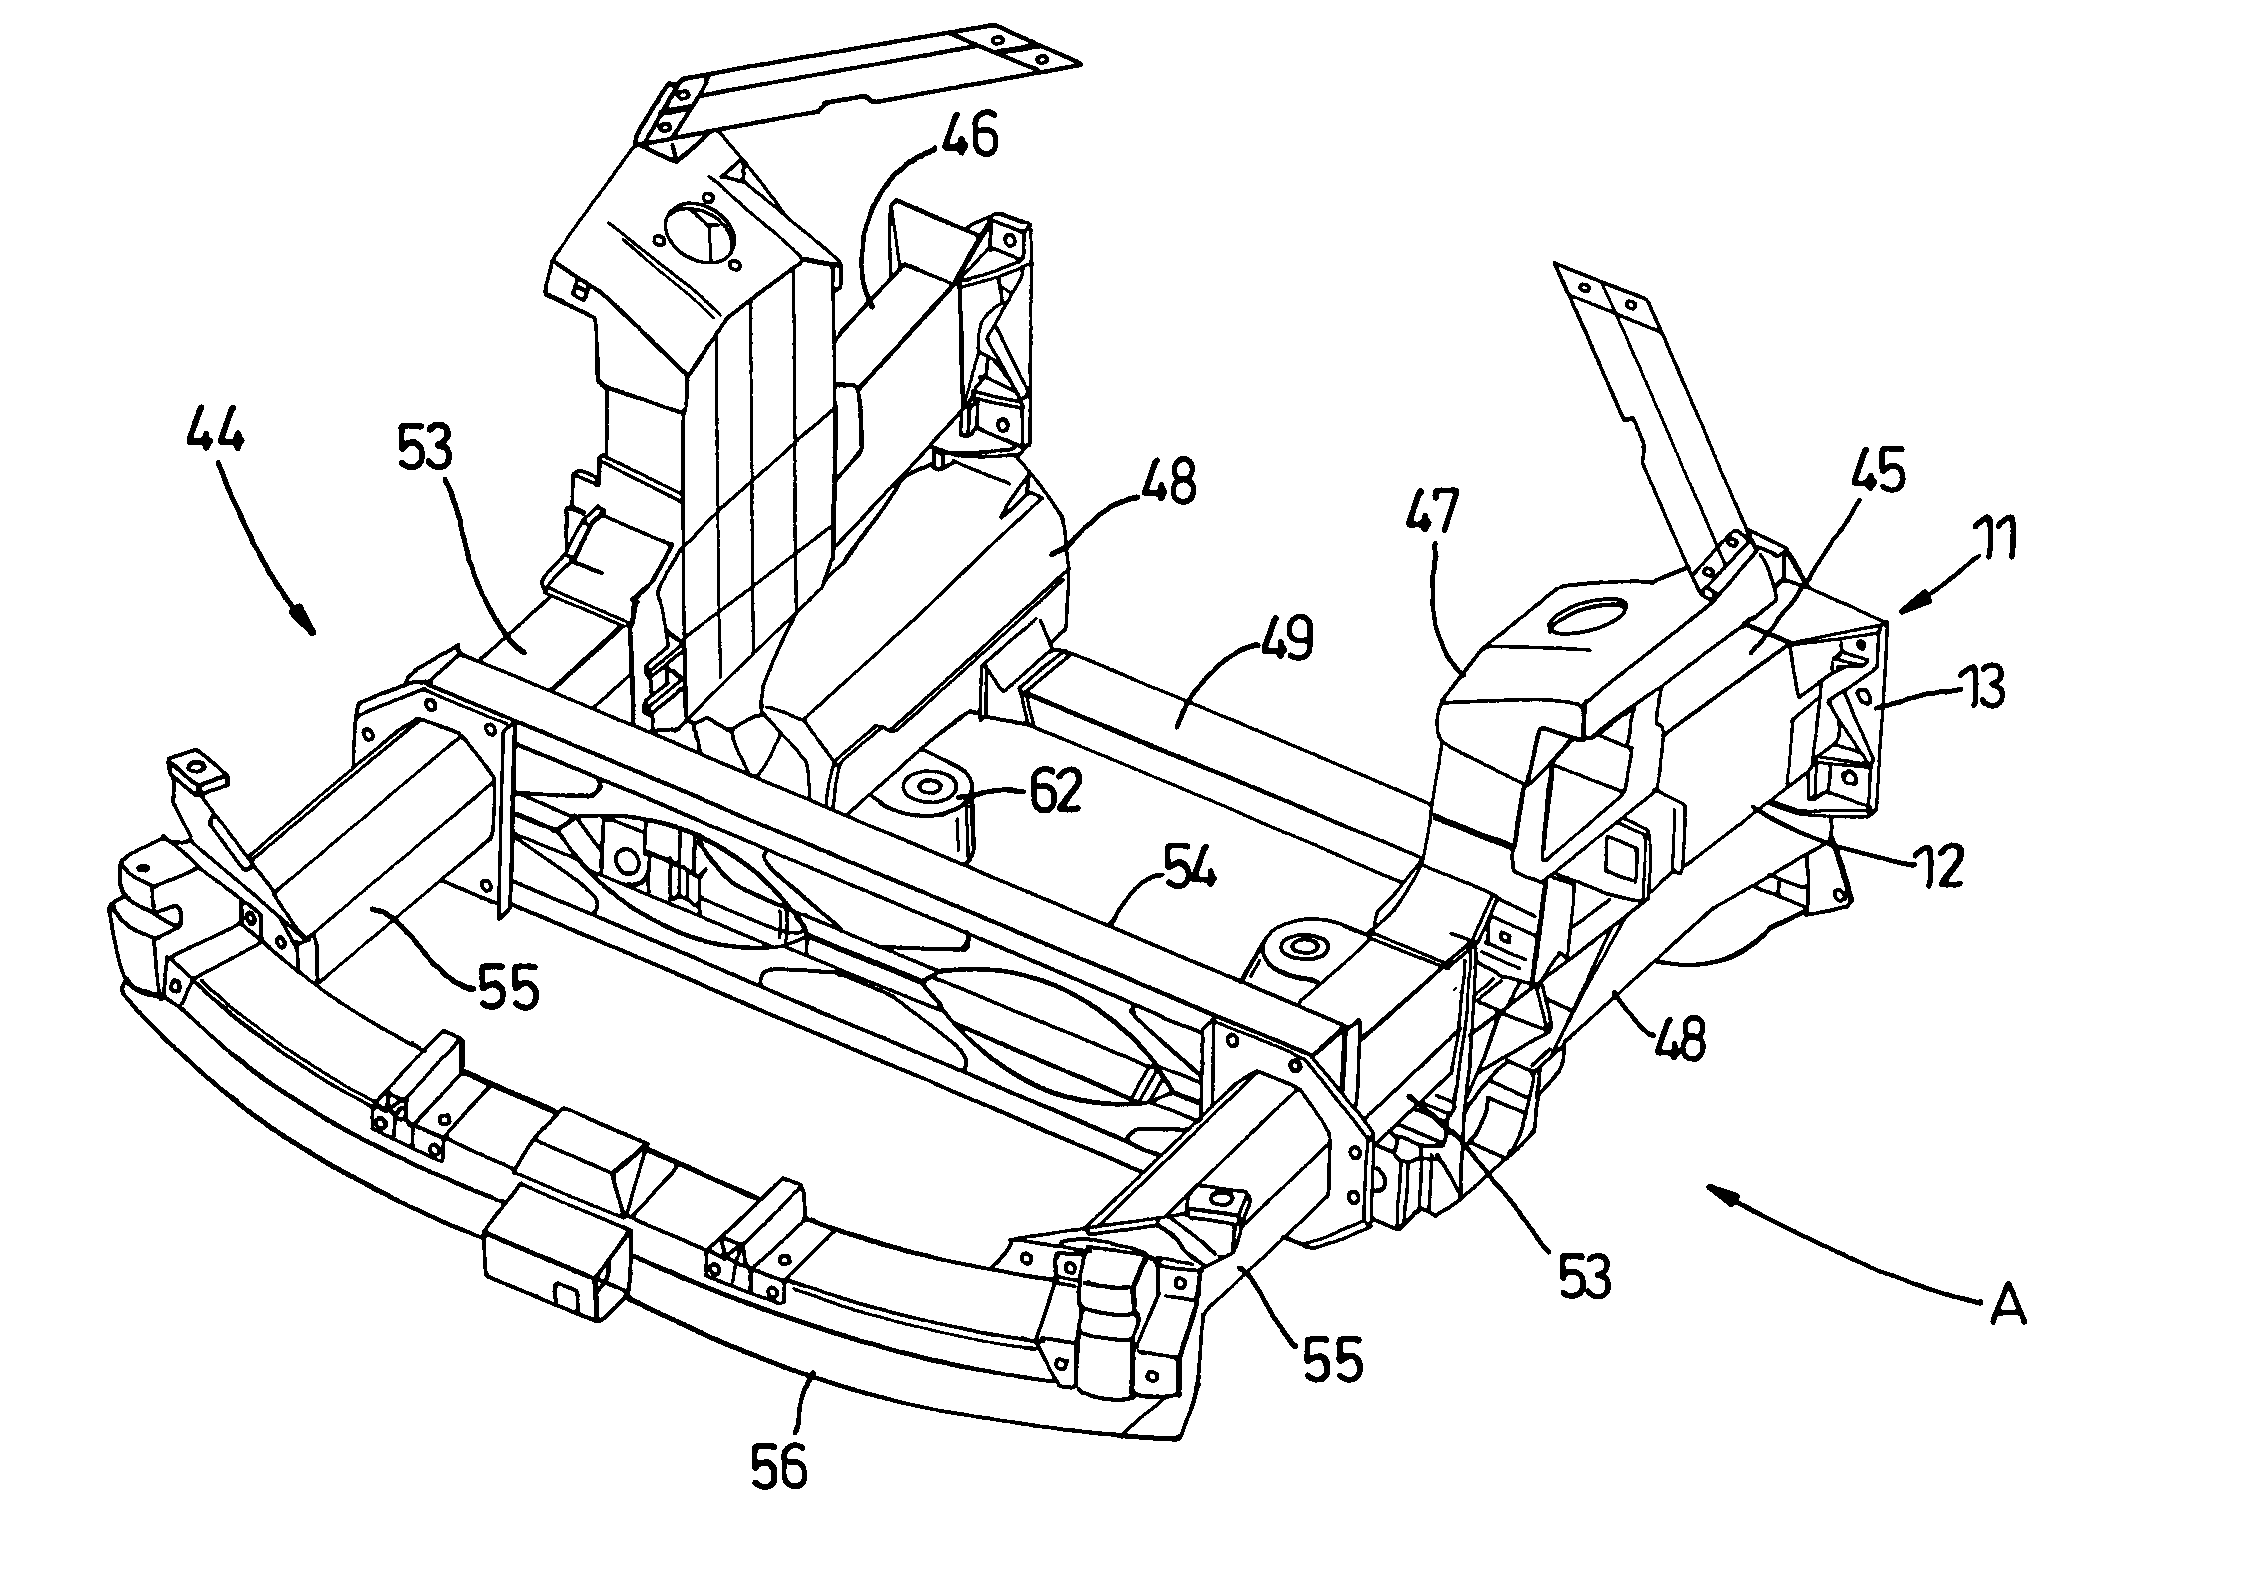 Assembly of motor vehicle body and a power train and chassis module